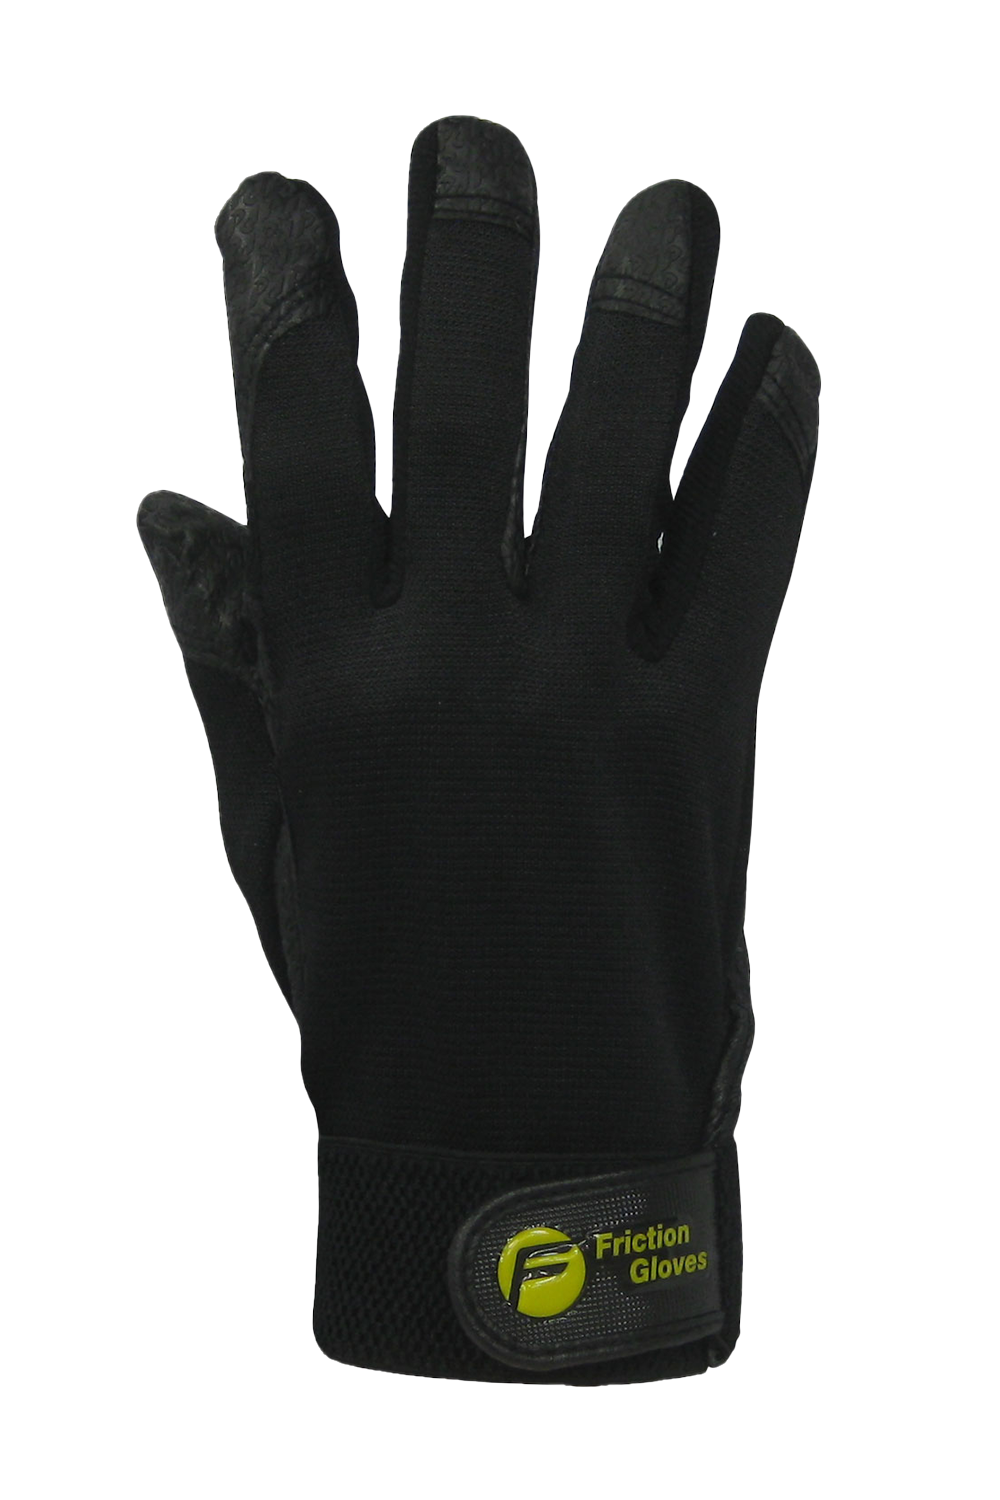 Friction Gloves – Spin Ultimate